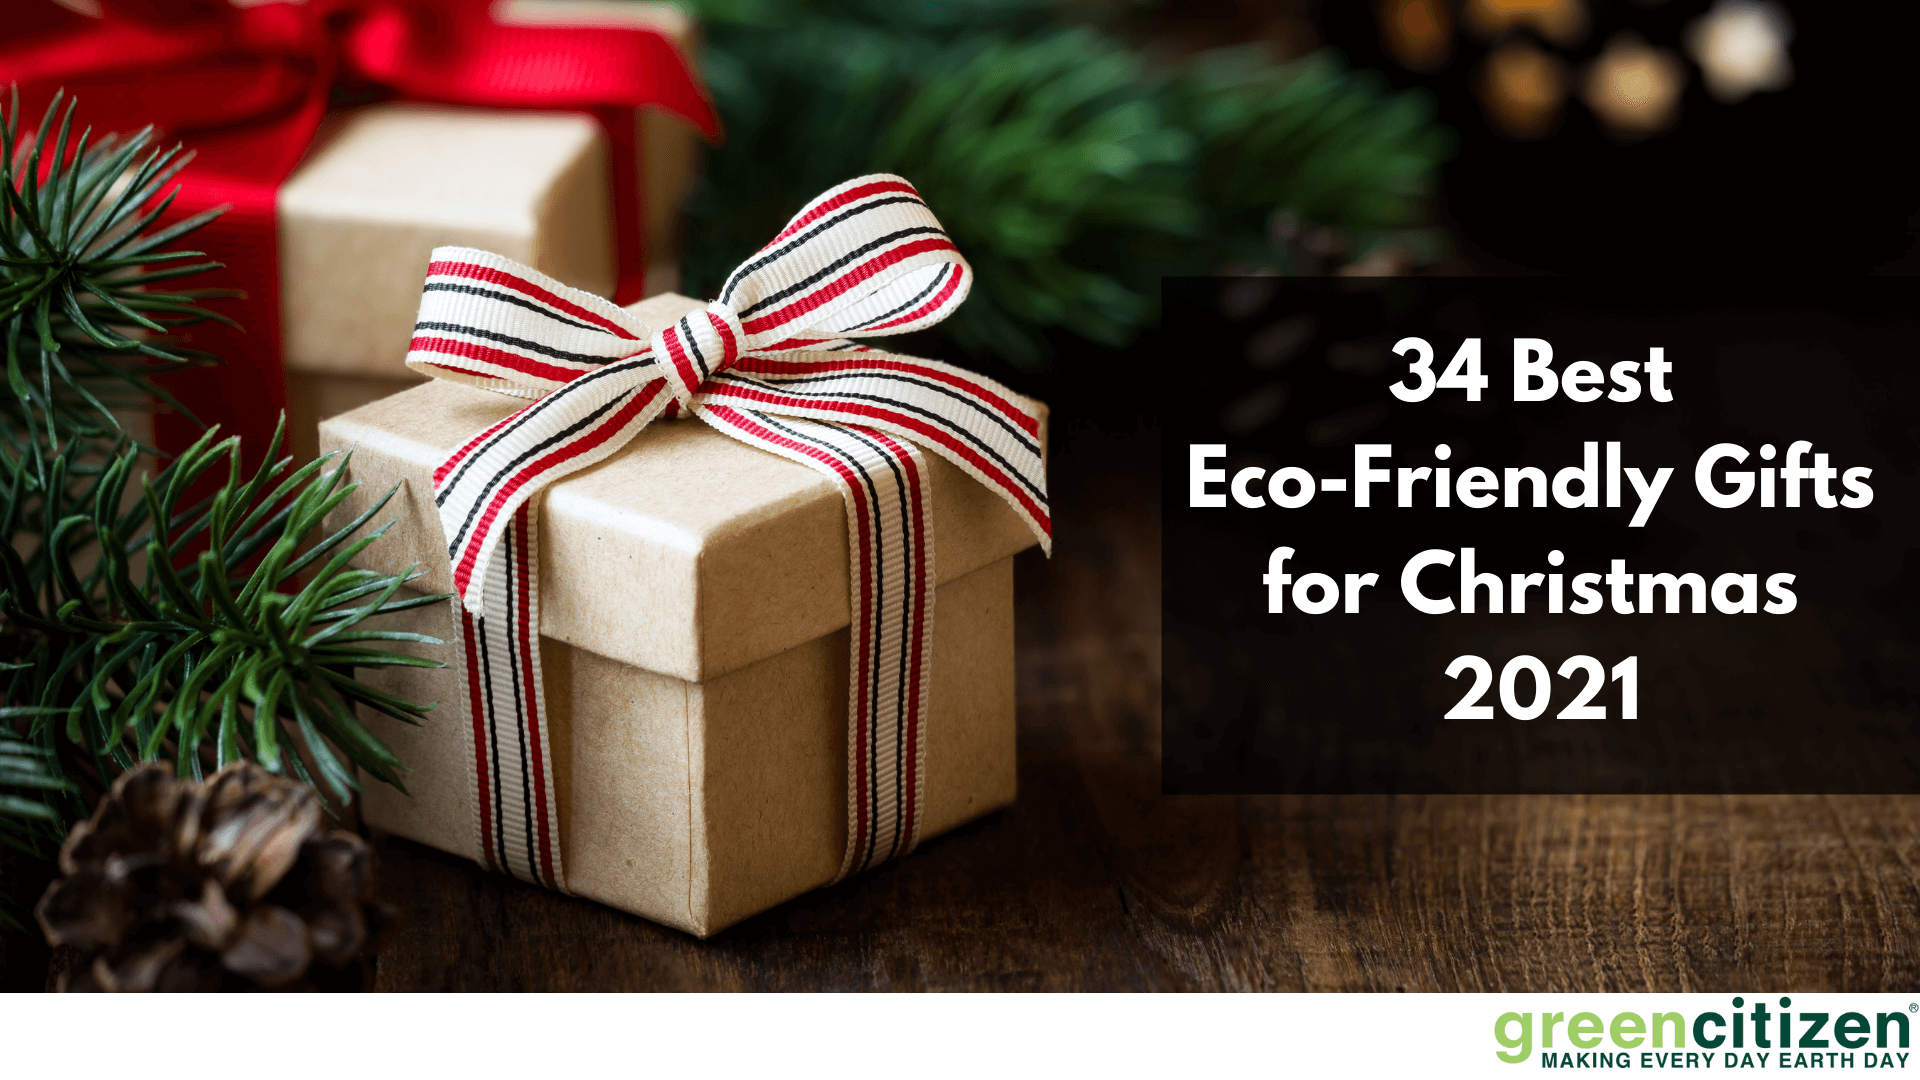 Best Eco-Friendly Gifts for Christmas